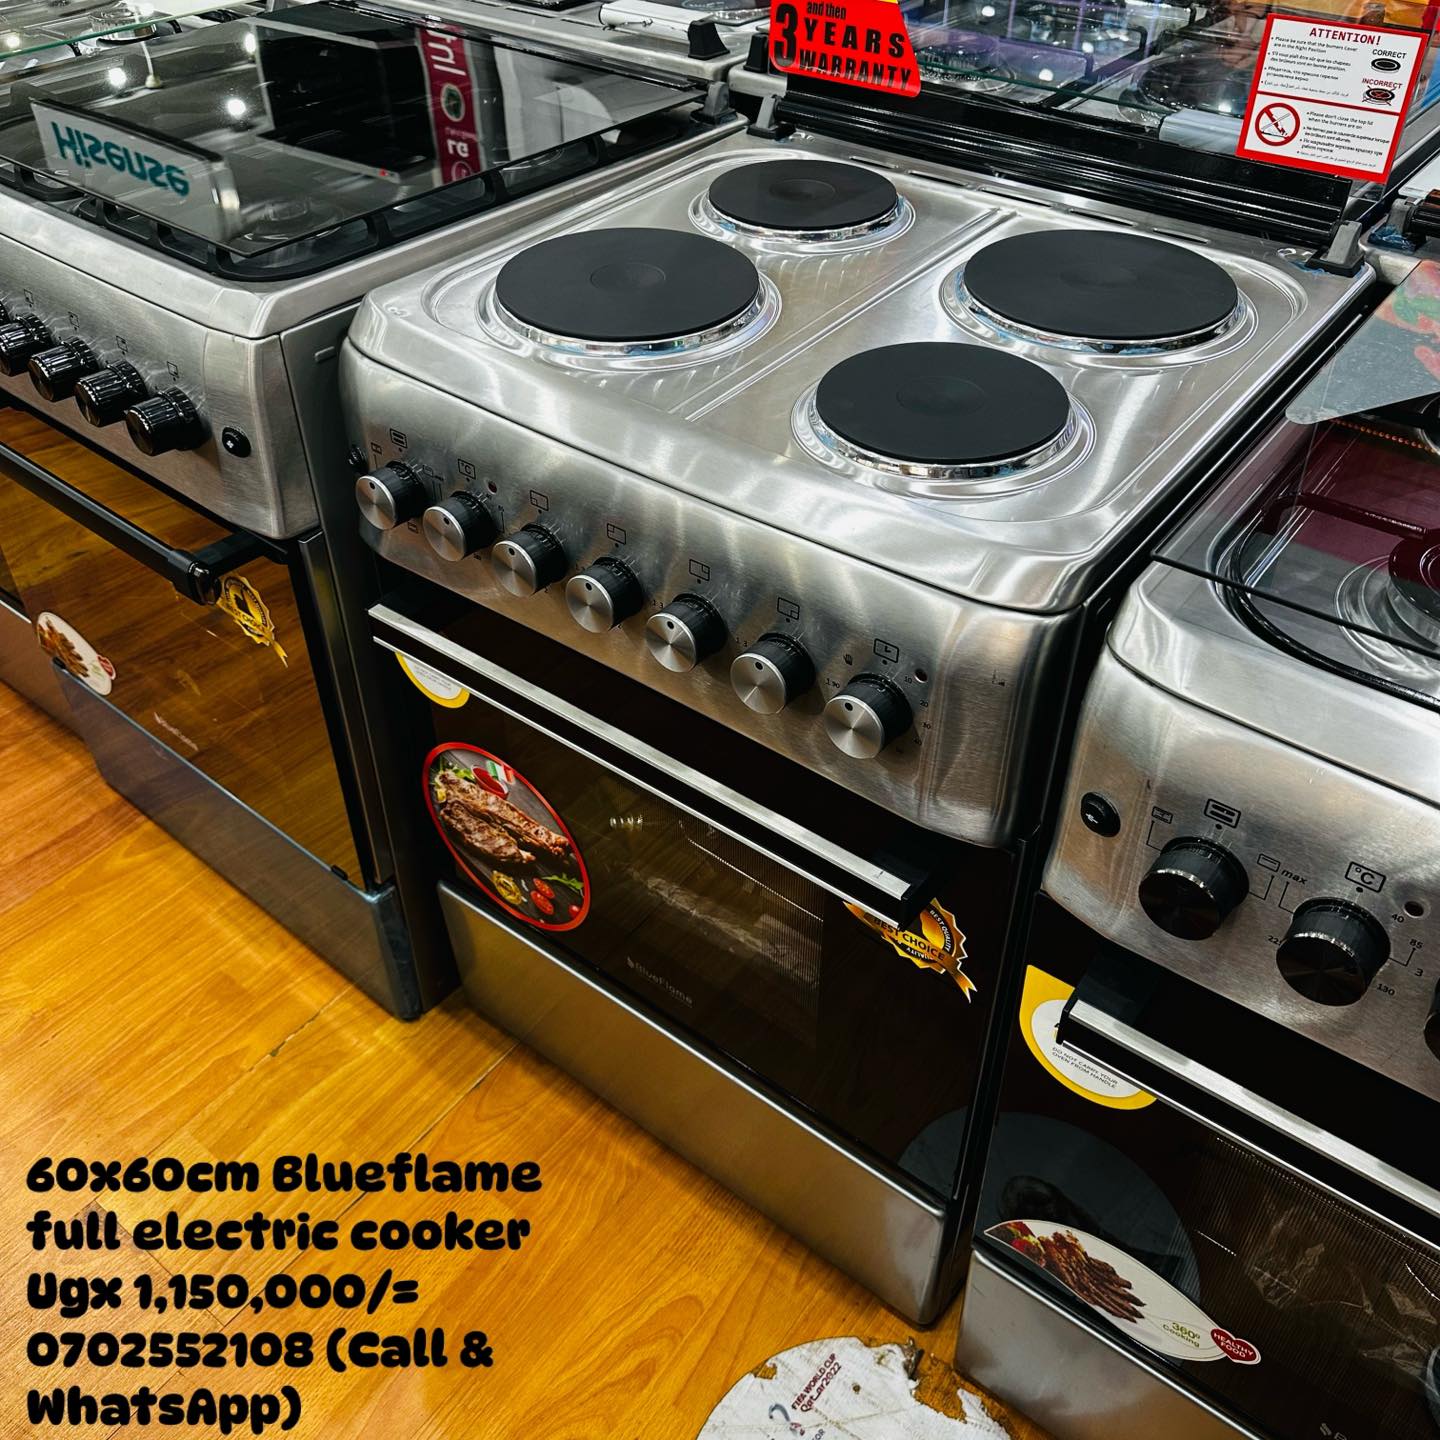 Blueflame 60x60cm full electric cooker